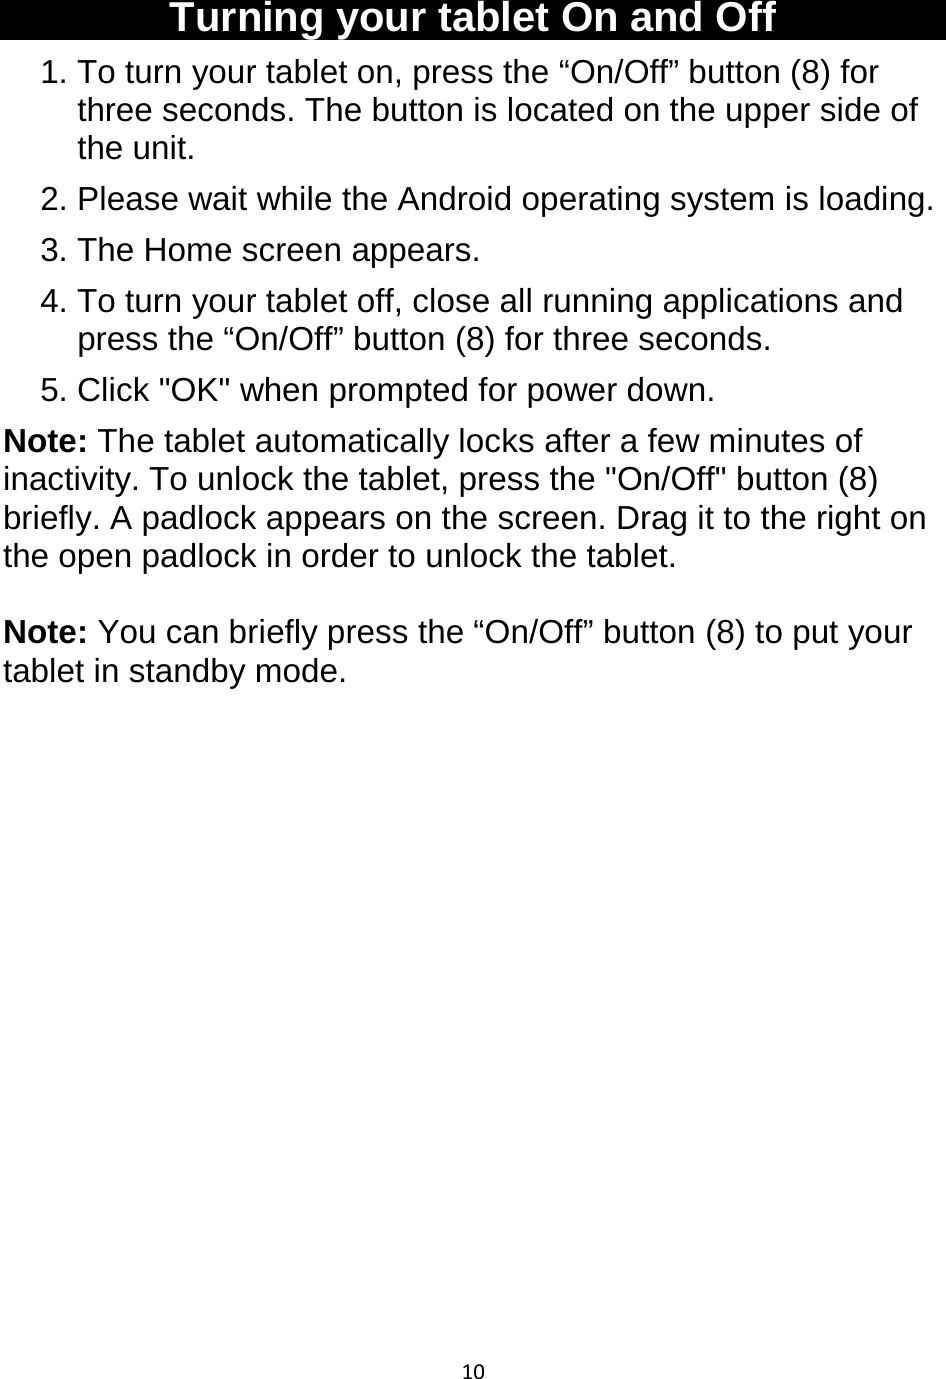 10   Turning your tablet On and Off 1. To turn your tablet on, press the “On/Off” button (8) for three seconds. The button is located on the upper side of the unit. 2. Please wait while the Android operating system is loading. 3. The Home screen appears. 4. To turn your tablet off, close all running applications and press the “On/Off” button (8) for three seconds. 5. Click &quot;OK&quot; when prompted for power down. Note: The tablet automatically locks after a few minutes of inactivity. To unlock the tablet, press the &quot;On/Off&quot; button (8) briefly. A padlock appears on the screen. Drag it to the right on the open padlock in order to unlock the tablet.   Note: You can briefly press the “On/Off” button (8) to put your tablet in standby mode.               